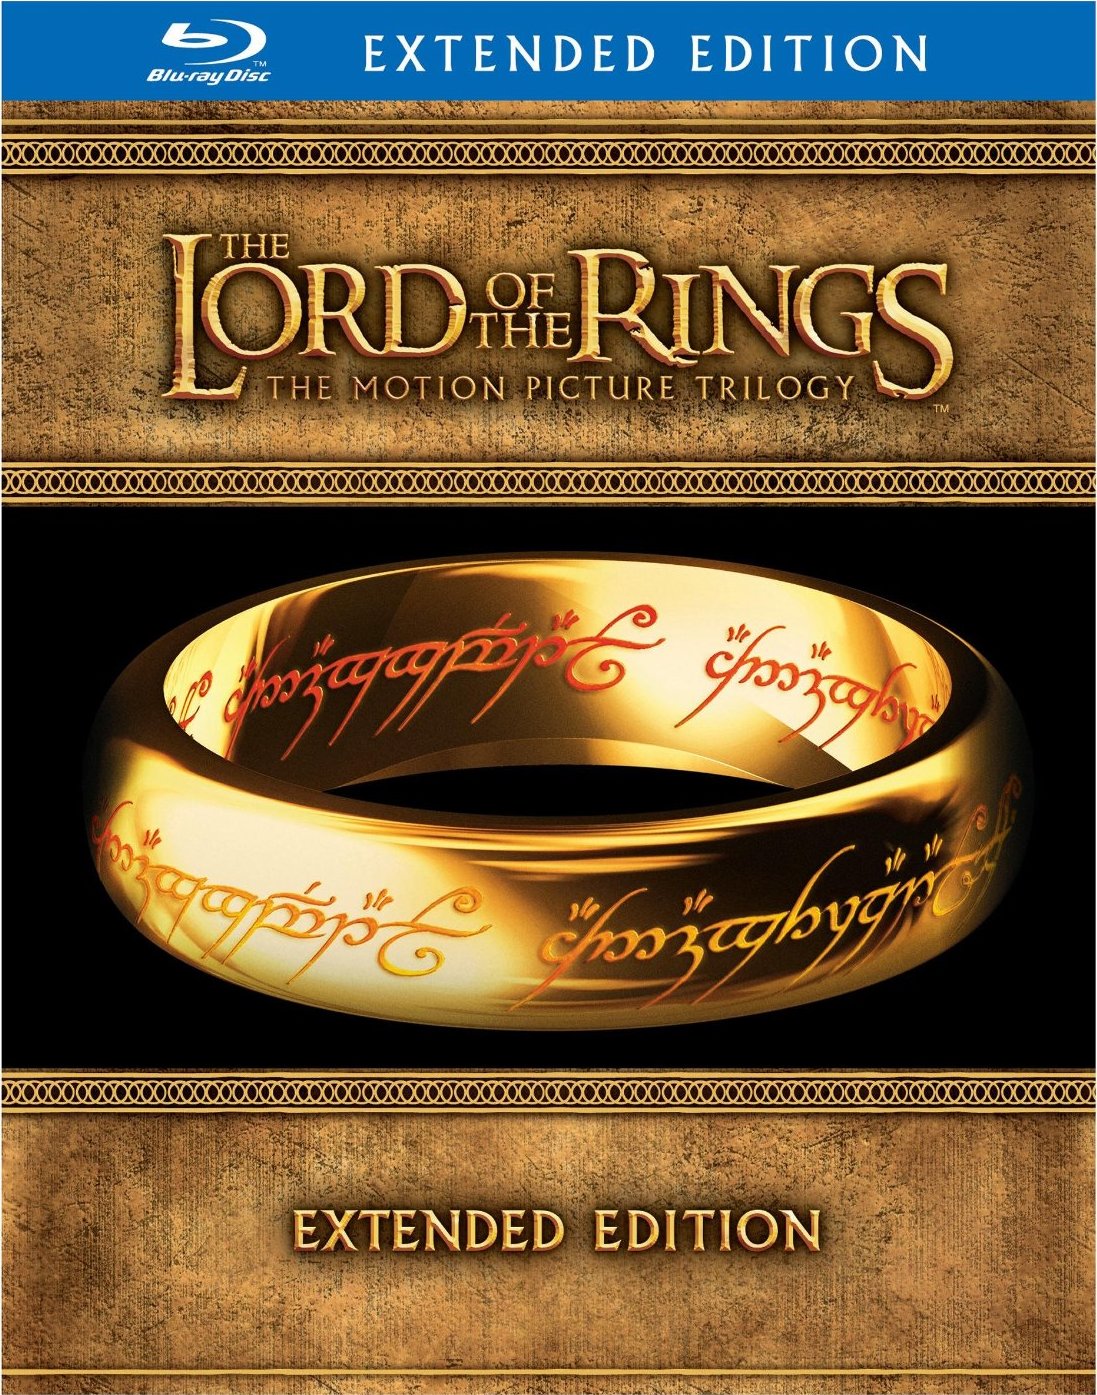 The Lord of the Rings: The Motion Picture Trilogy (Extended Edition) [2001-2003] El Señor de los Anillos: Trilogía (Edición Extendida) [2001-2003] [AC3 5.1 + SRT] [Blu Ray-Rip] 59886_front